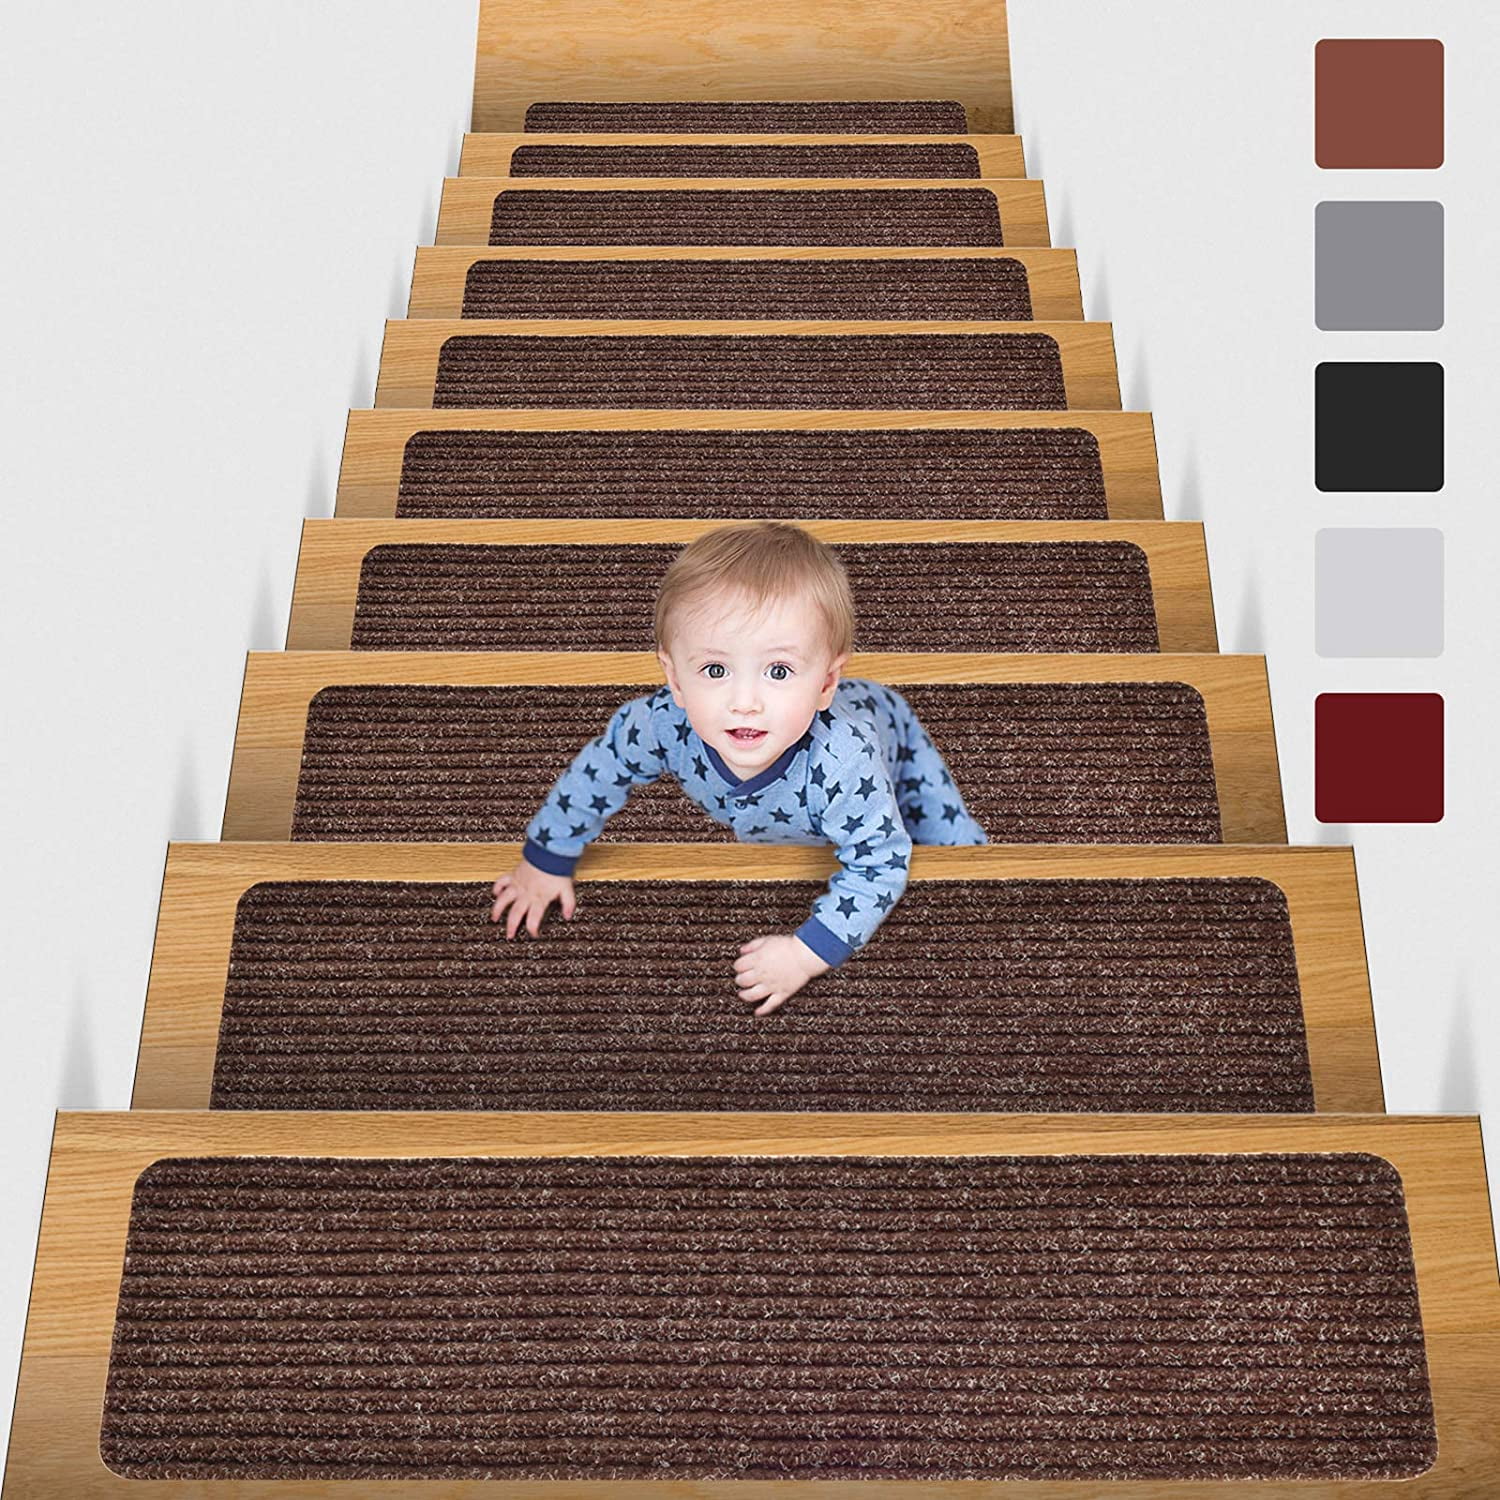 MBIGM 8-Pack Non-Slip Outdoor Stair Treads - Anti Slip 6 x 30 Grip Tape Adhesive Strips - Heavy Duty Traction for Steps, Stair